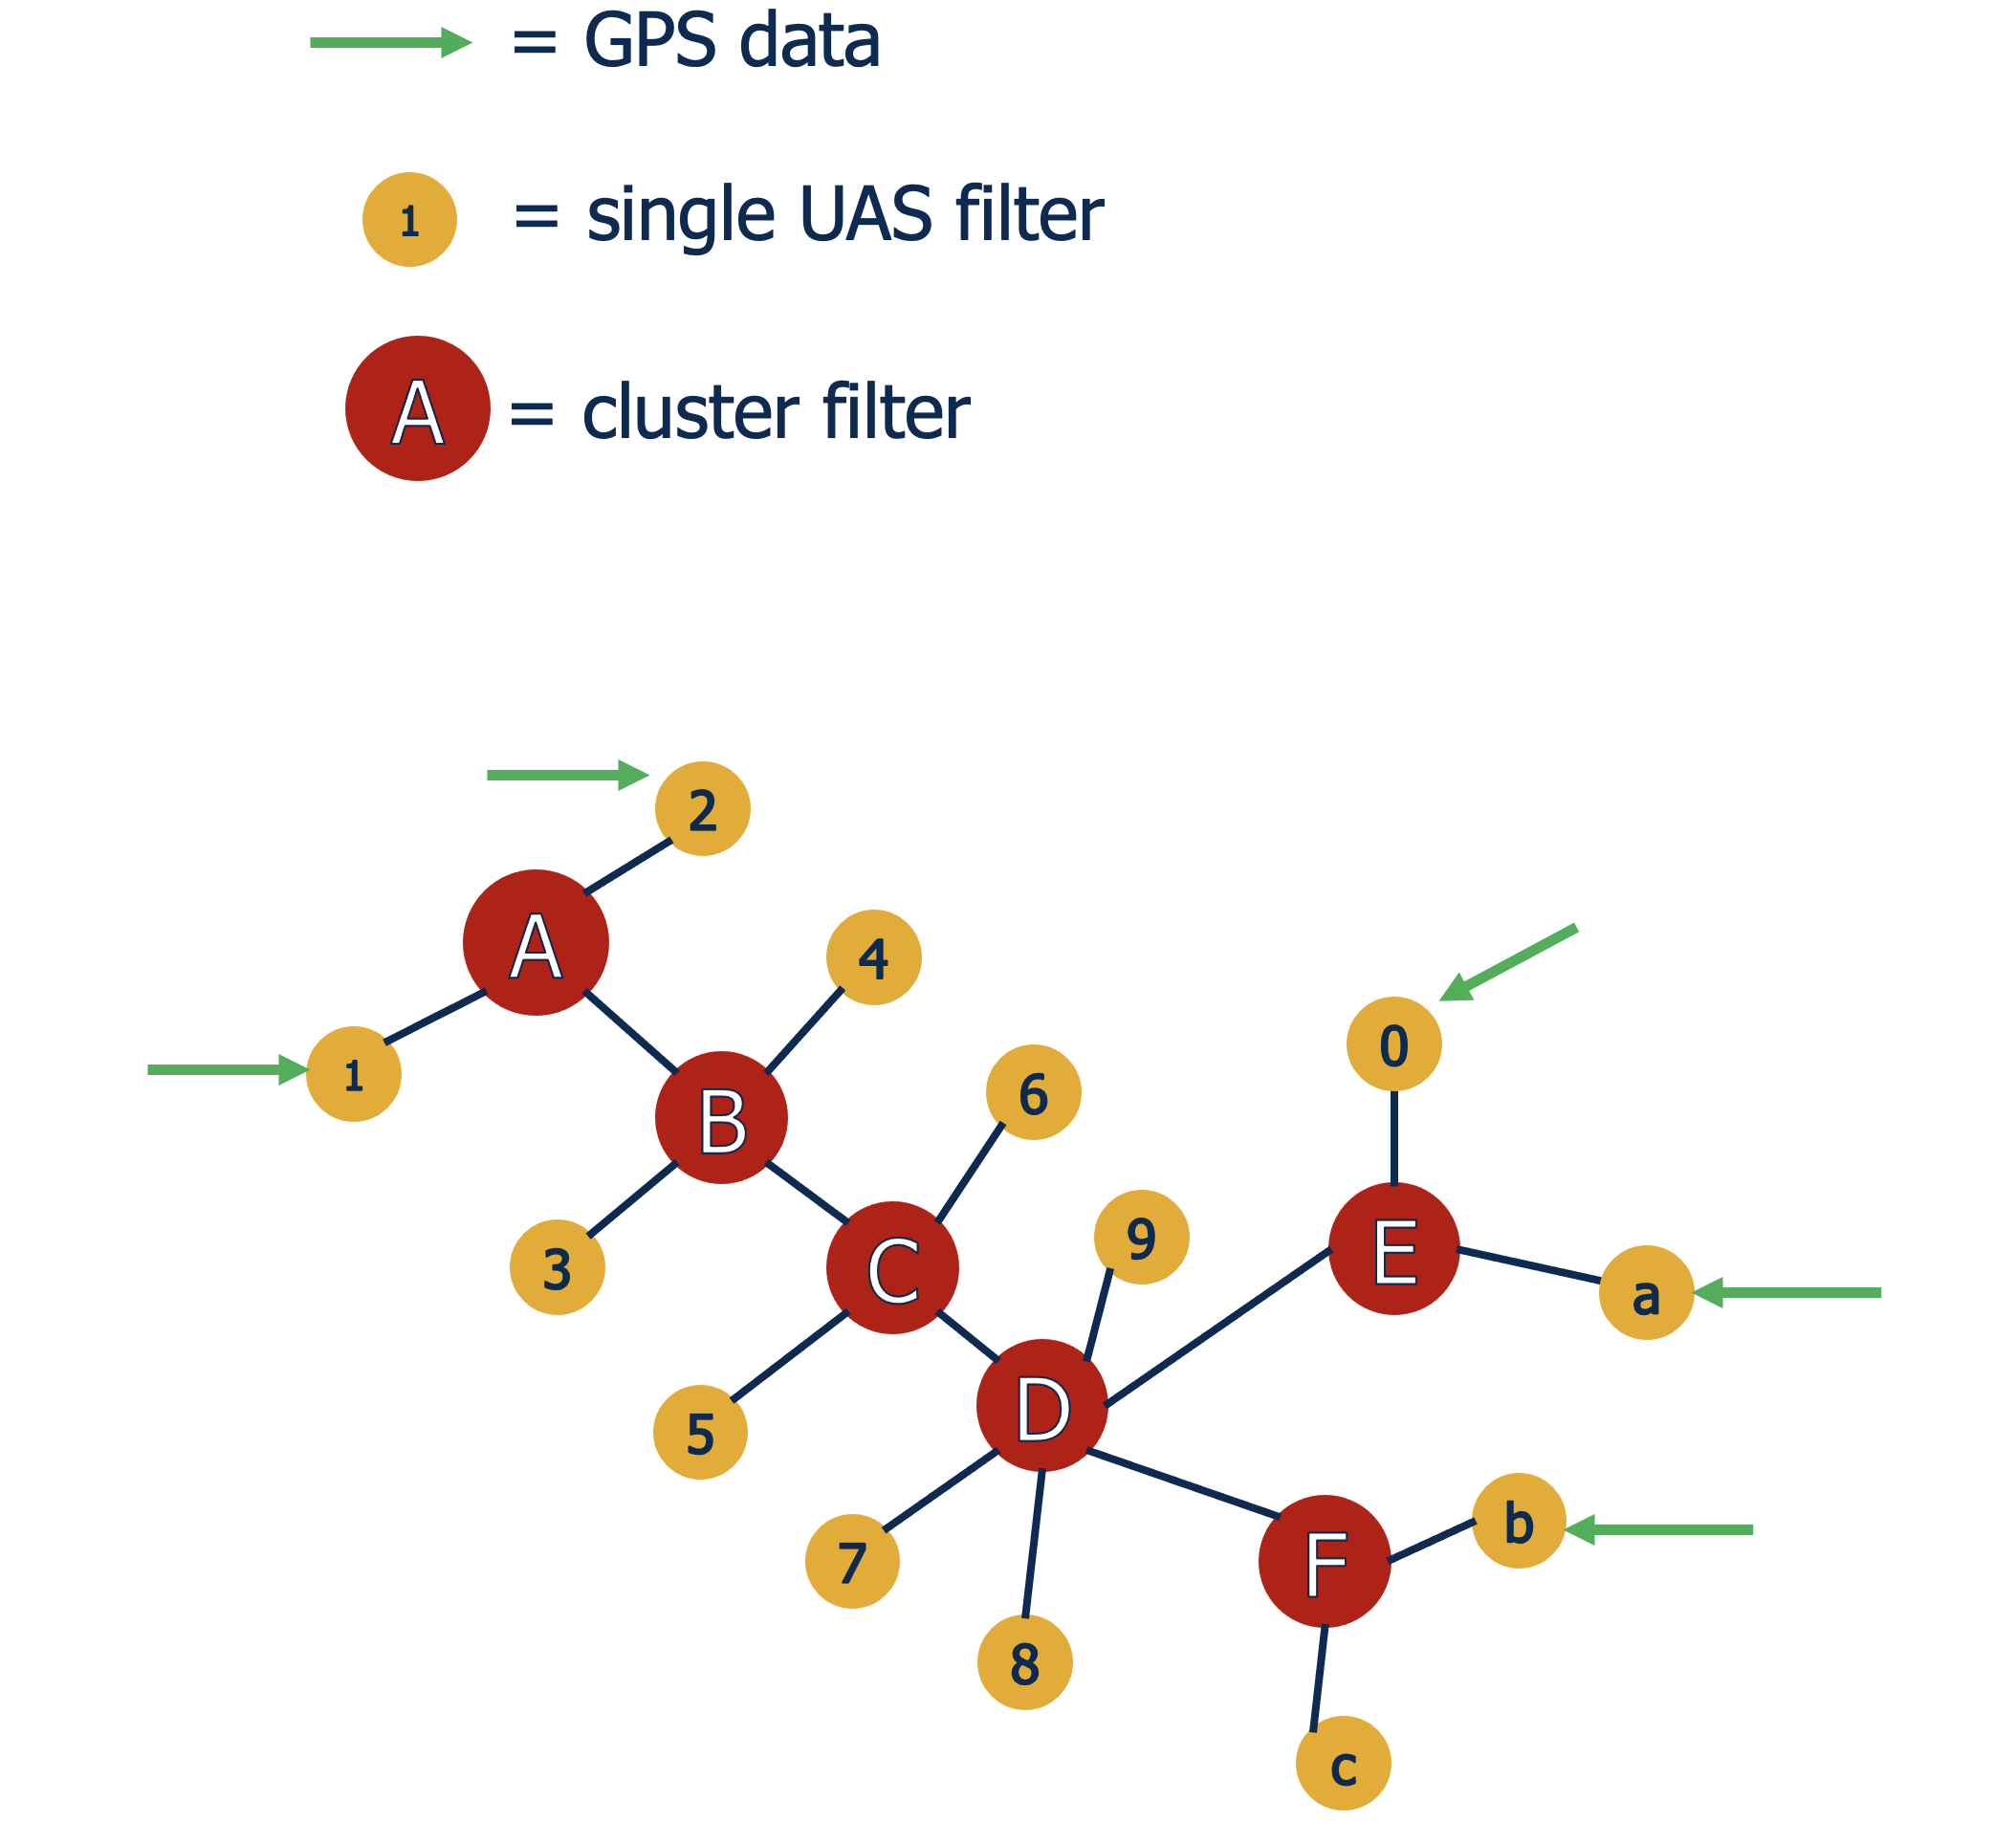 Pairs of UAS filters indicated by yellow numbered dots are connected to cluster filters indicated by red lettered dots in a chain of six pairs (A–F). Green arrows point to five of the UAS filters, indicating incoming GPS data. 